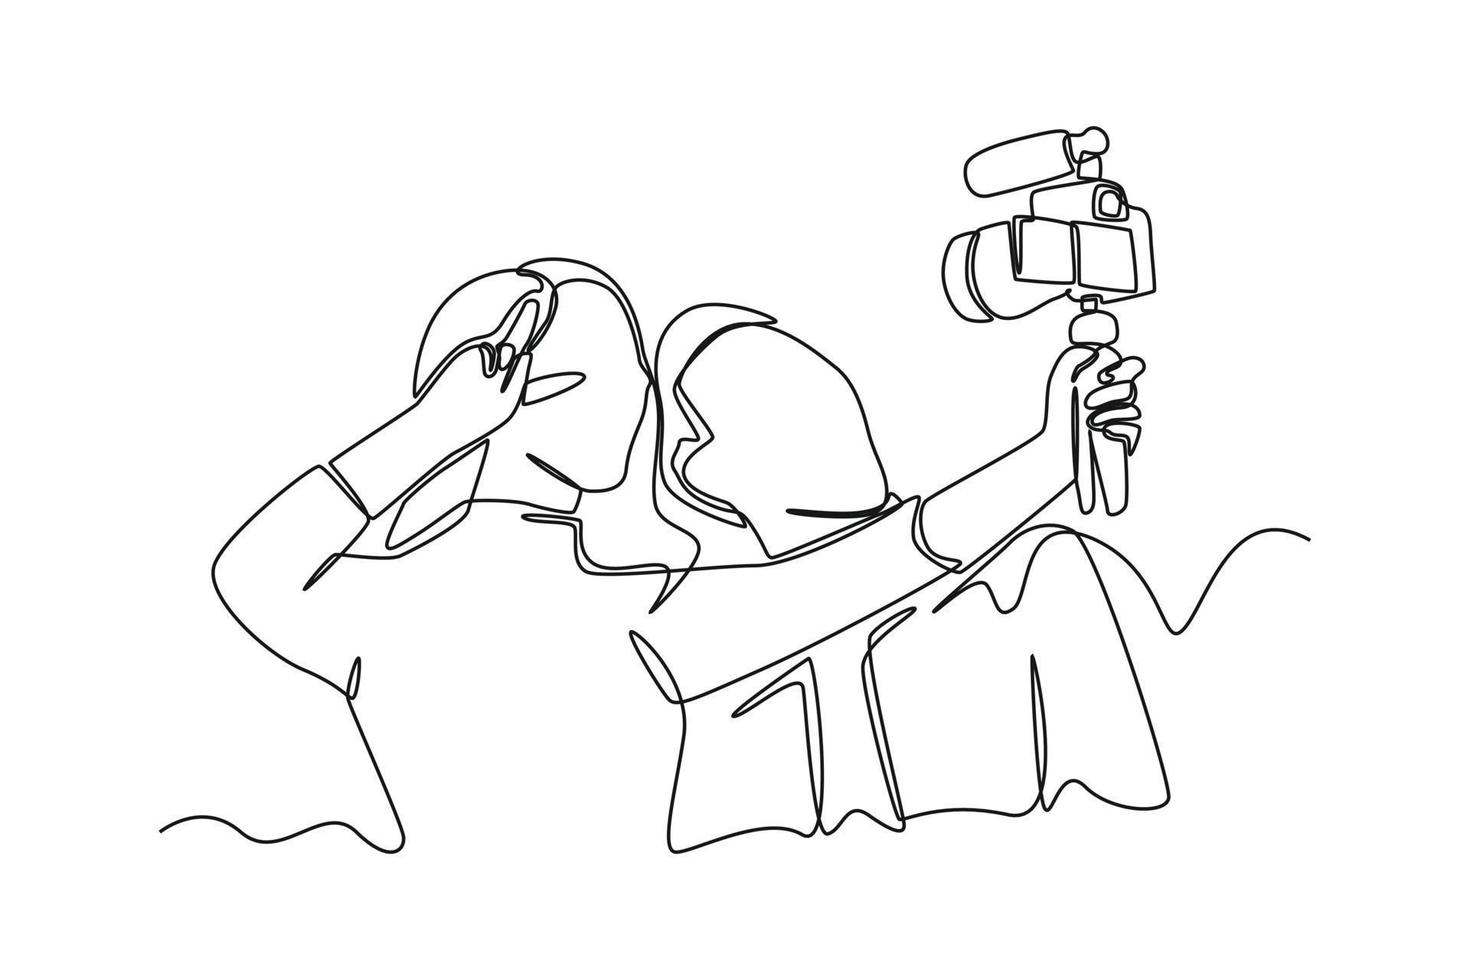 Single one line drawing Cute couple traveling together while vlogging to a video camera on handheld tripod. Vlogging concept. Continuous line draw design graphic vector illustration.